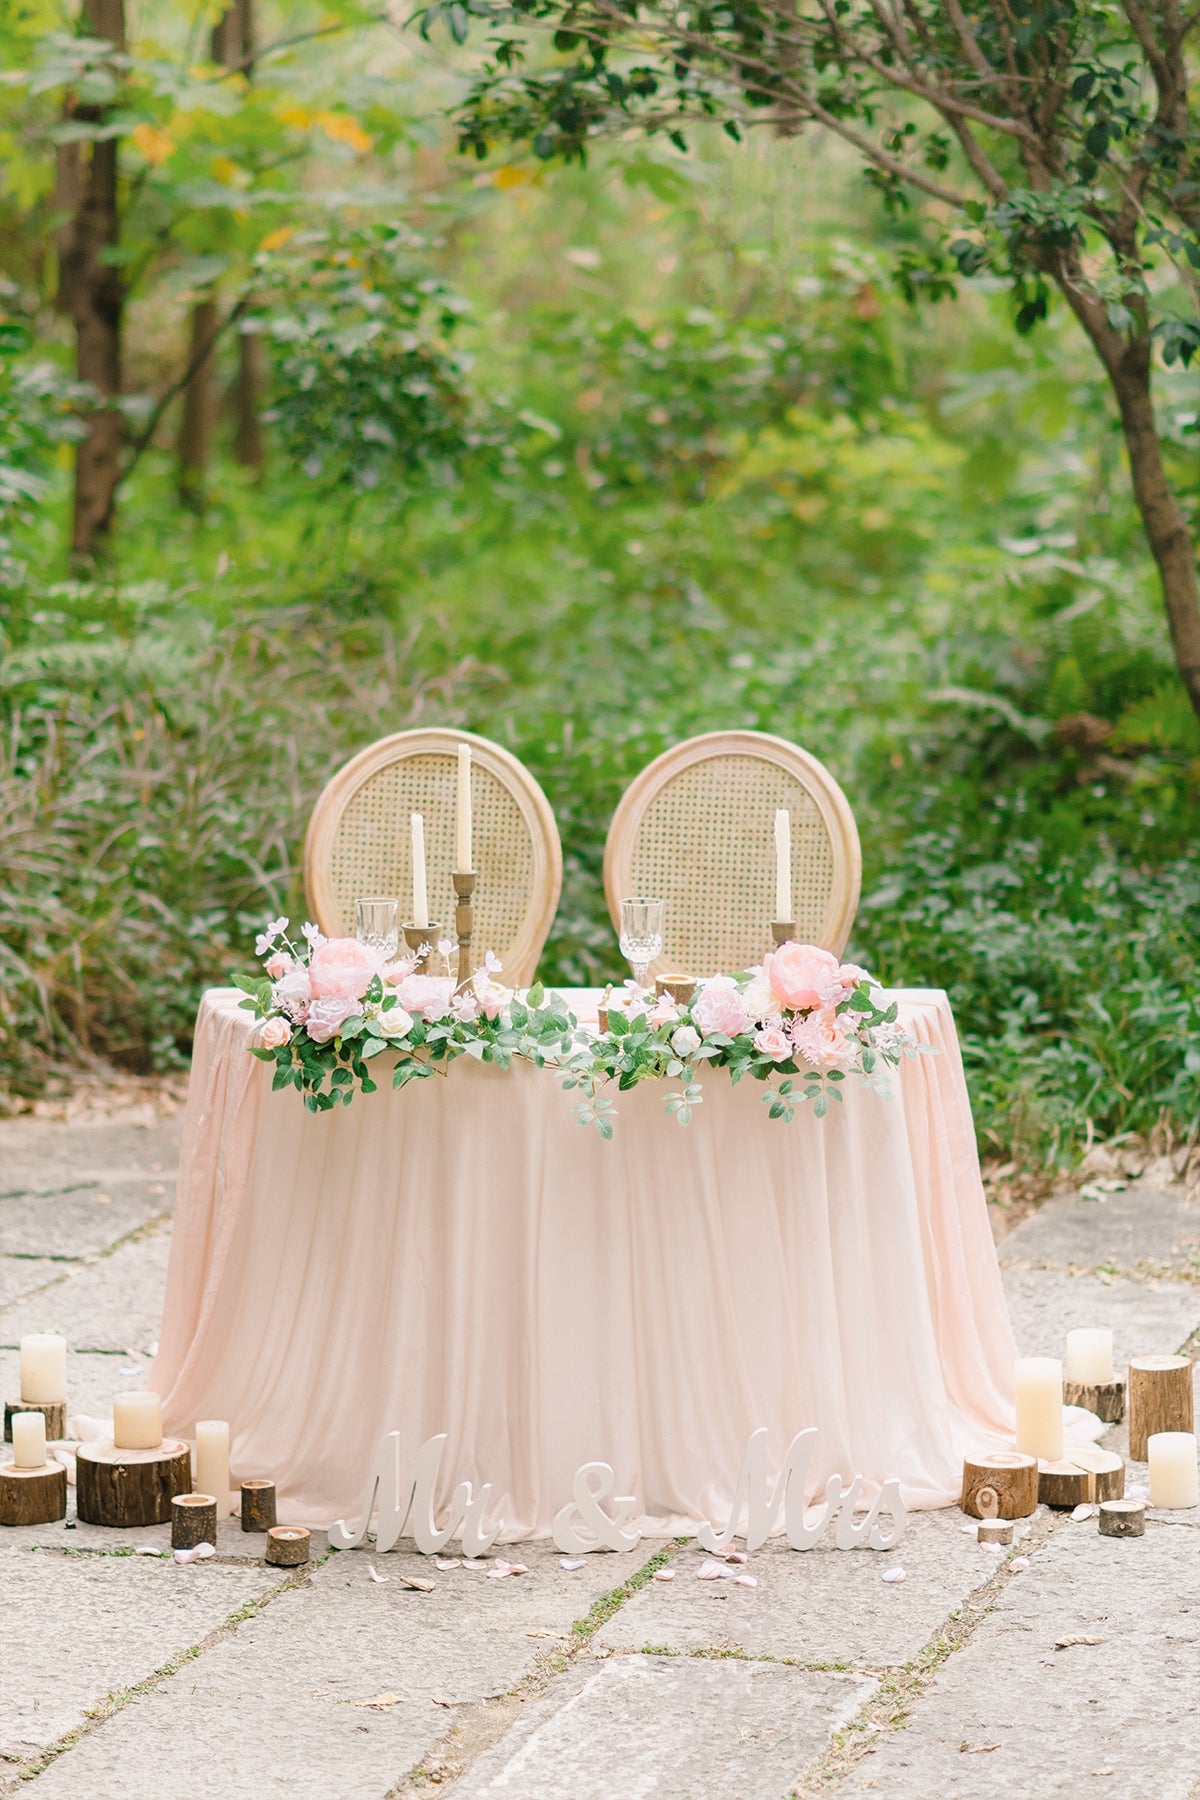 Flash Sale | Head Table Floral Swags in Blush & Cream